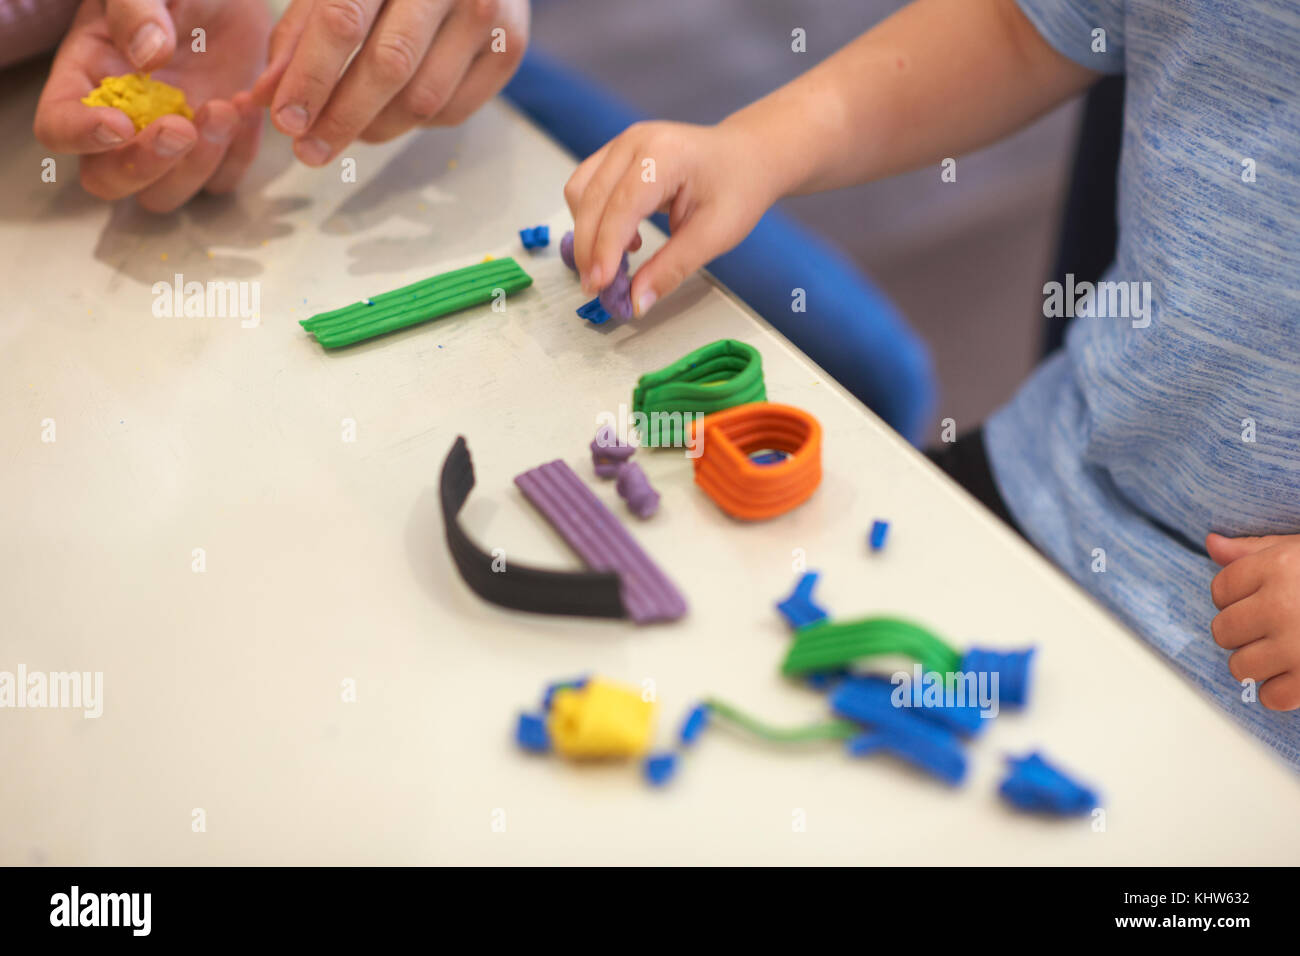 Father and son, sitting at table, playing with modelling clay, close-up Stock Photo